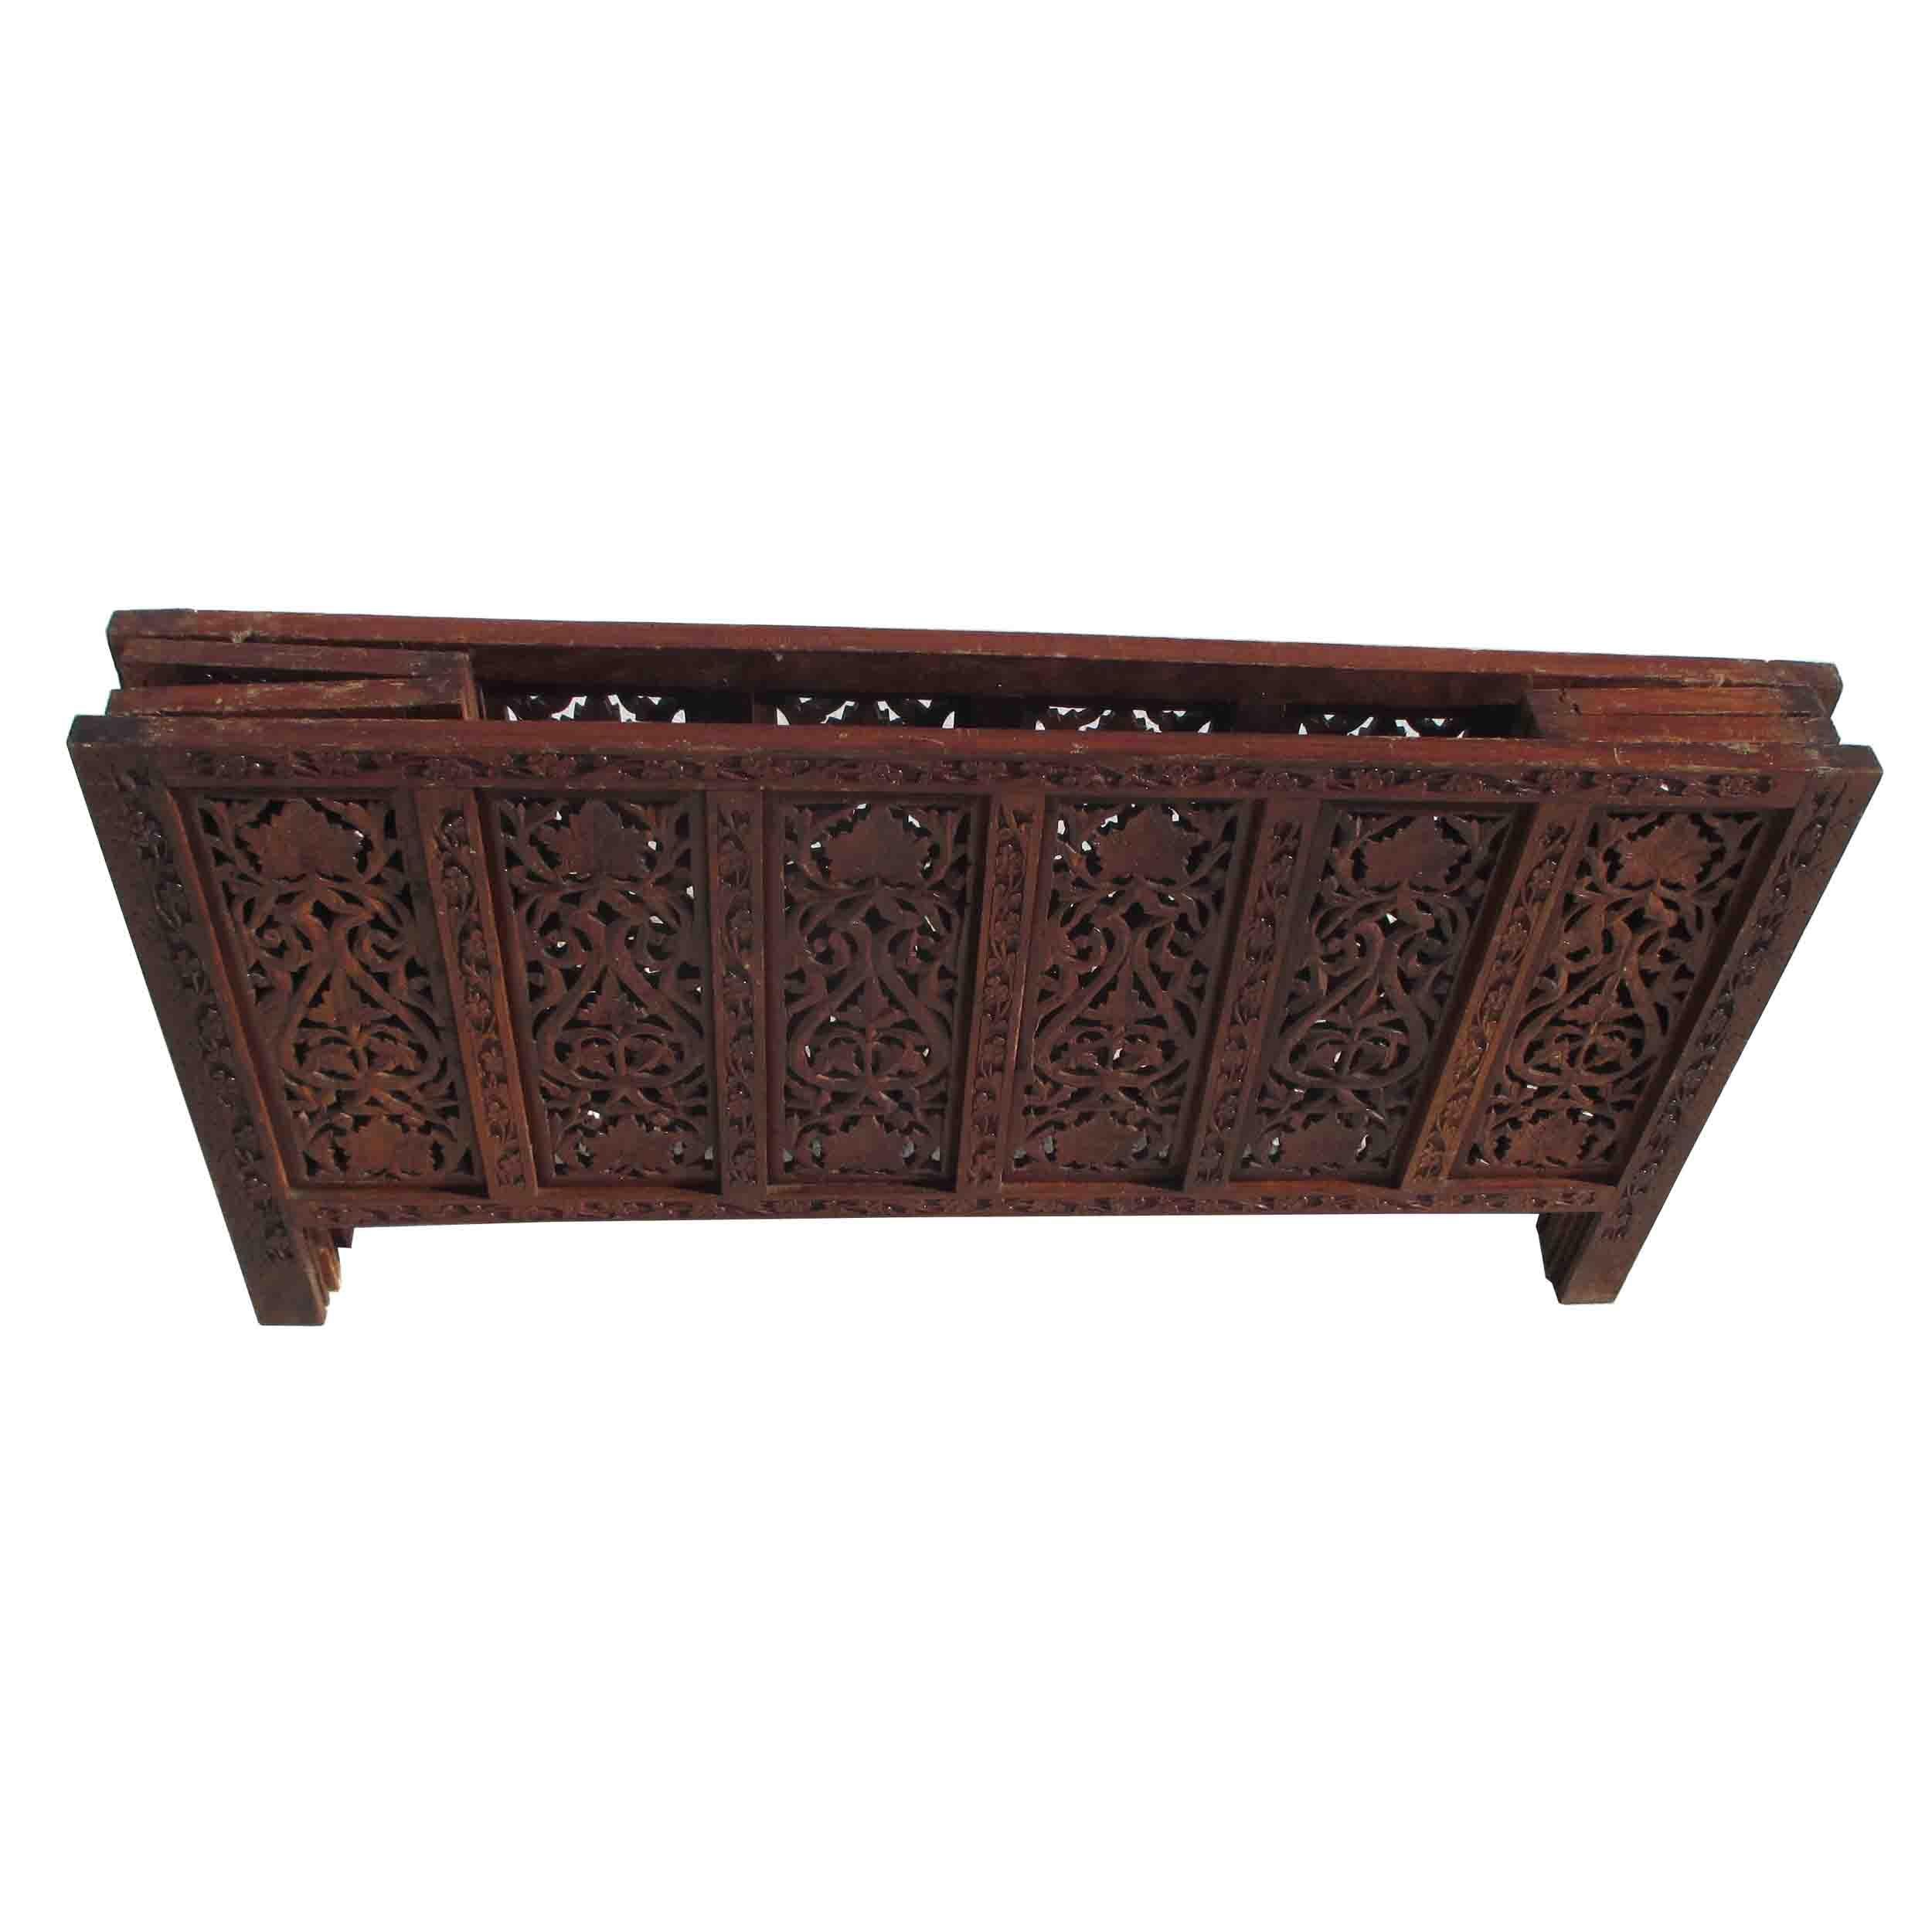 Fretwork Indonesian Fret Work Alter Console Table For Sale